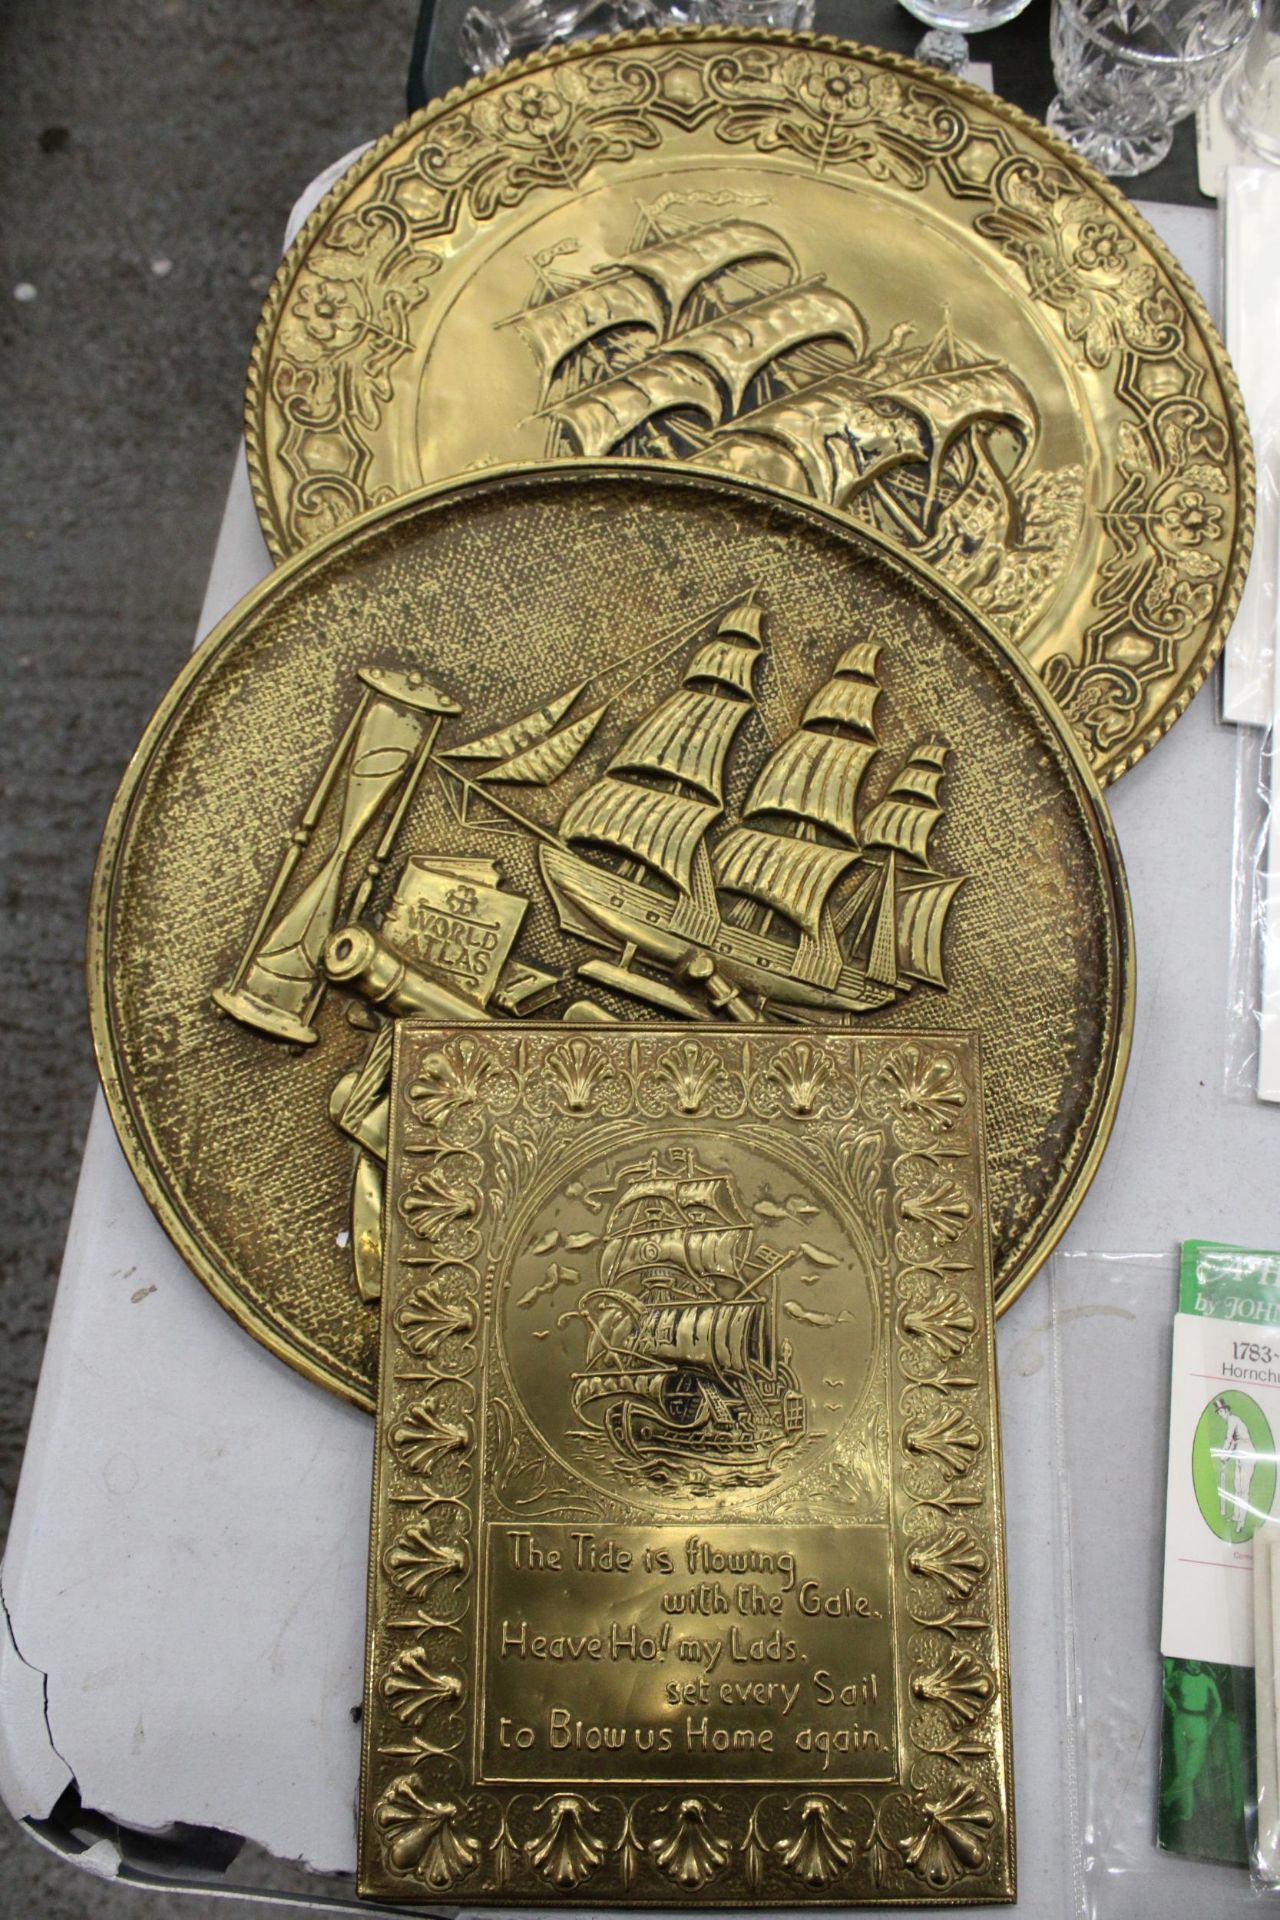 TWO LARGE BRASS VINTAGE WALL PLAQUES WITH SHIP DECORATION, DIAMETER 36CM PLUS A RECTANGULAR WALL